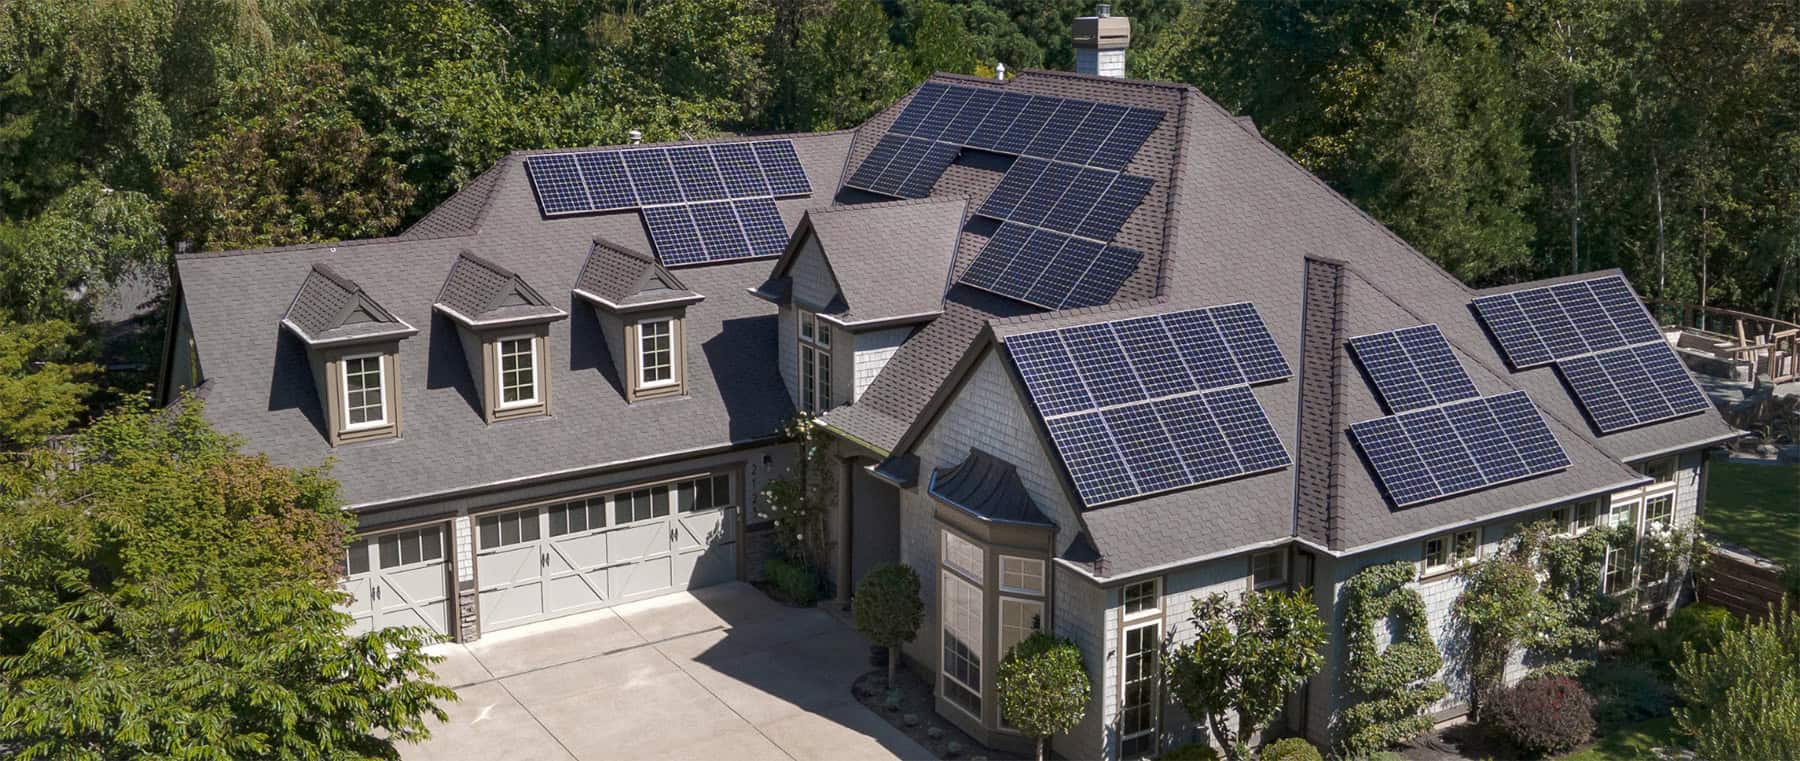 A lake Oswego home with a rooftop solar energy system